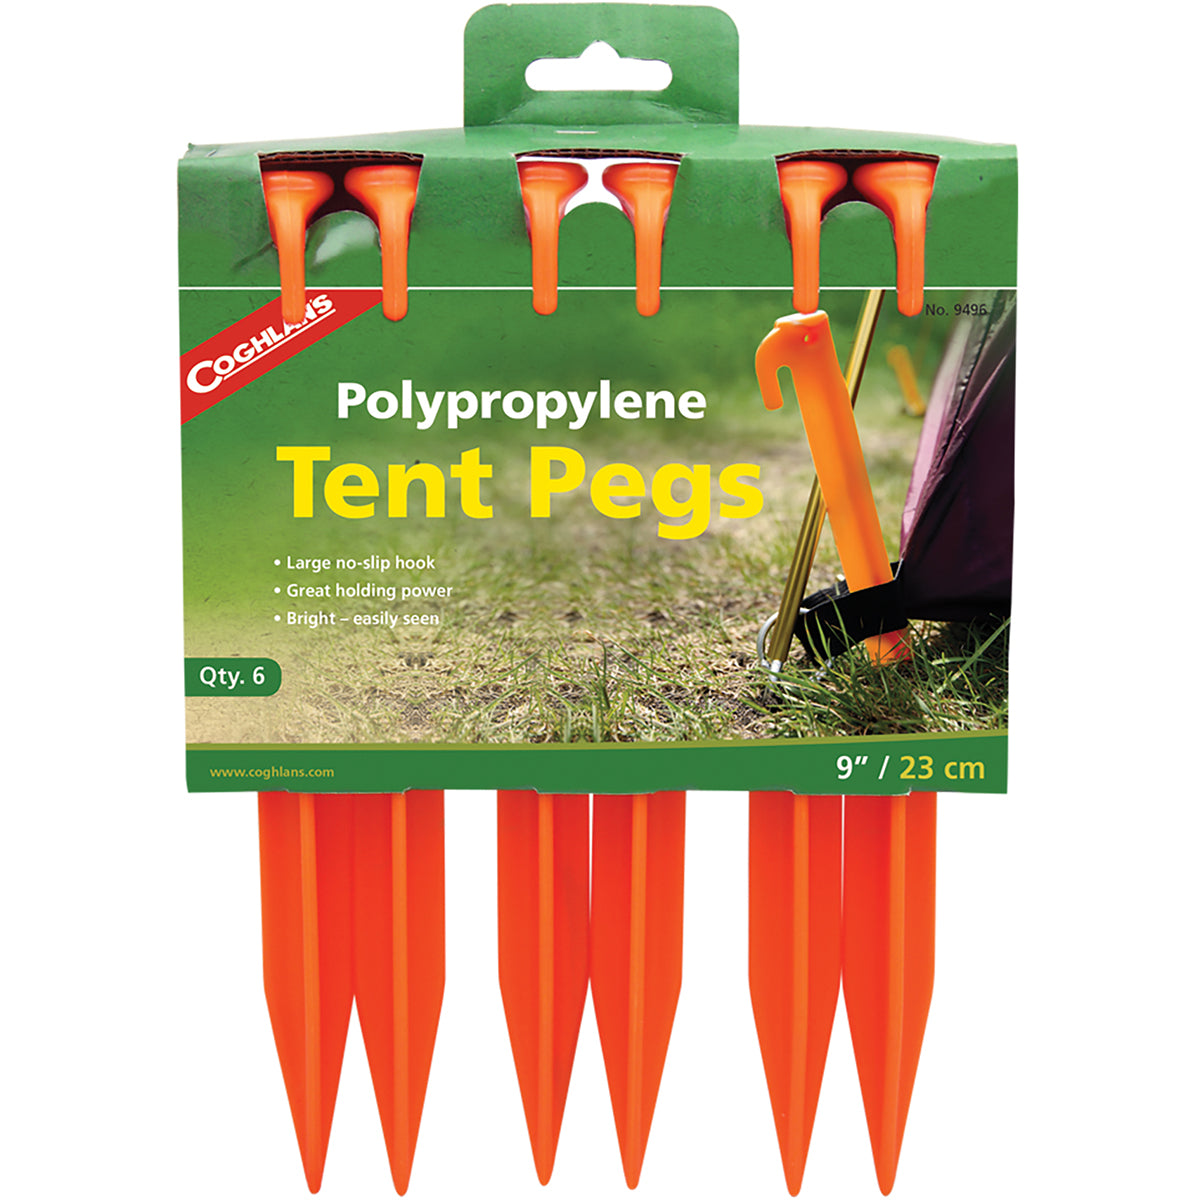 Coghlan's Polypropylene 9" Tent Pegs (6 Pack), Camping Survival Camp Stakes Coghlan's